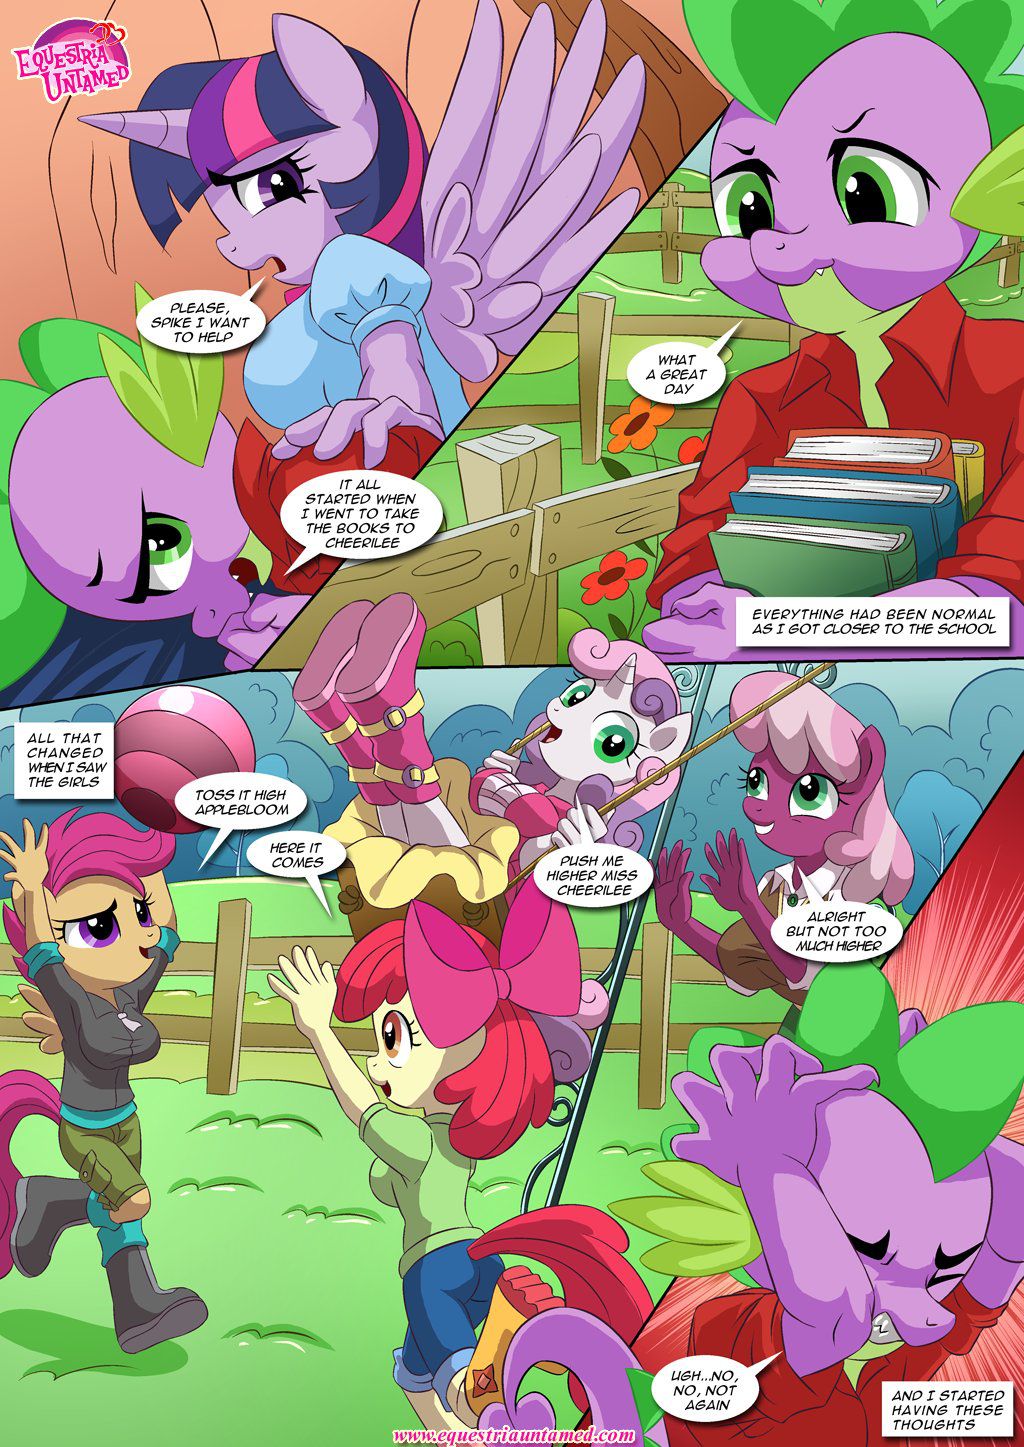 [Palcomix] Sex Ed with Miss Twilight Sparkle (My Little Pony Friendship Is Magic) [Ongoing] 6